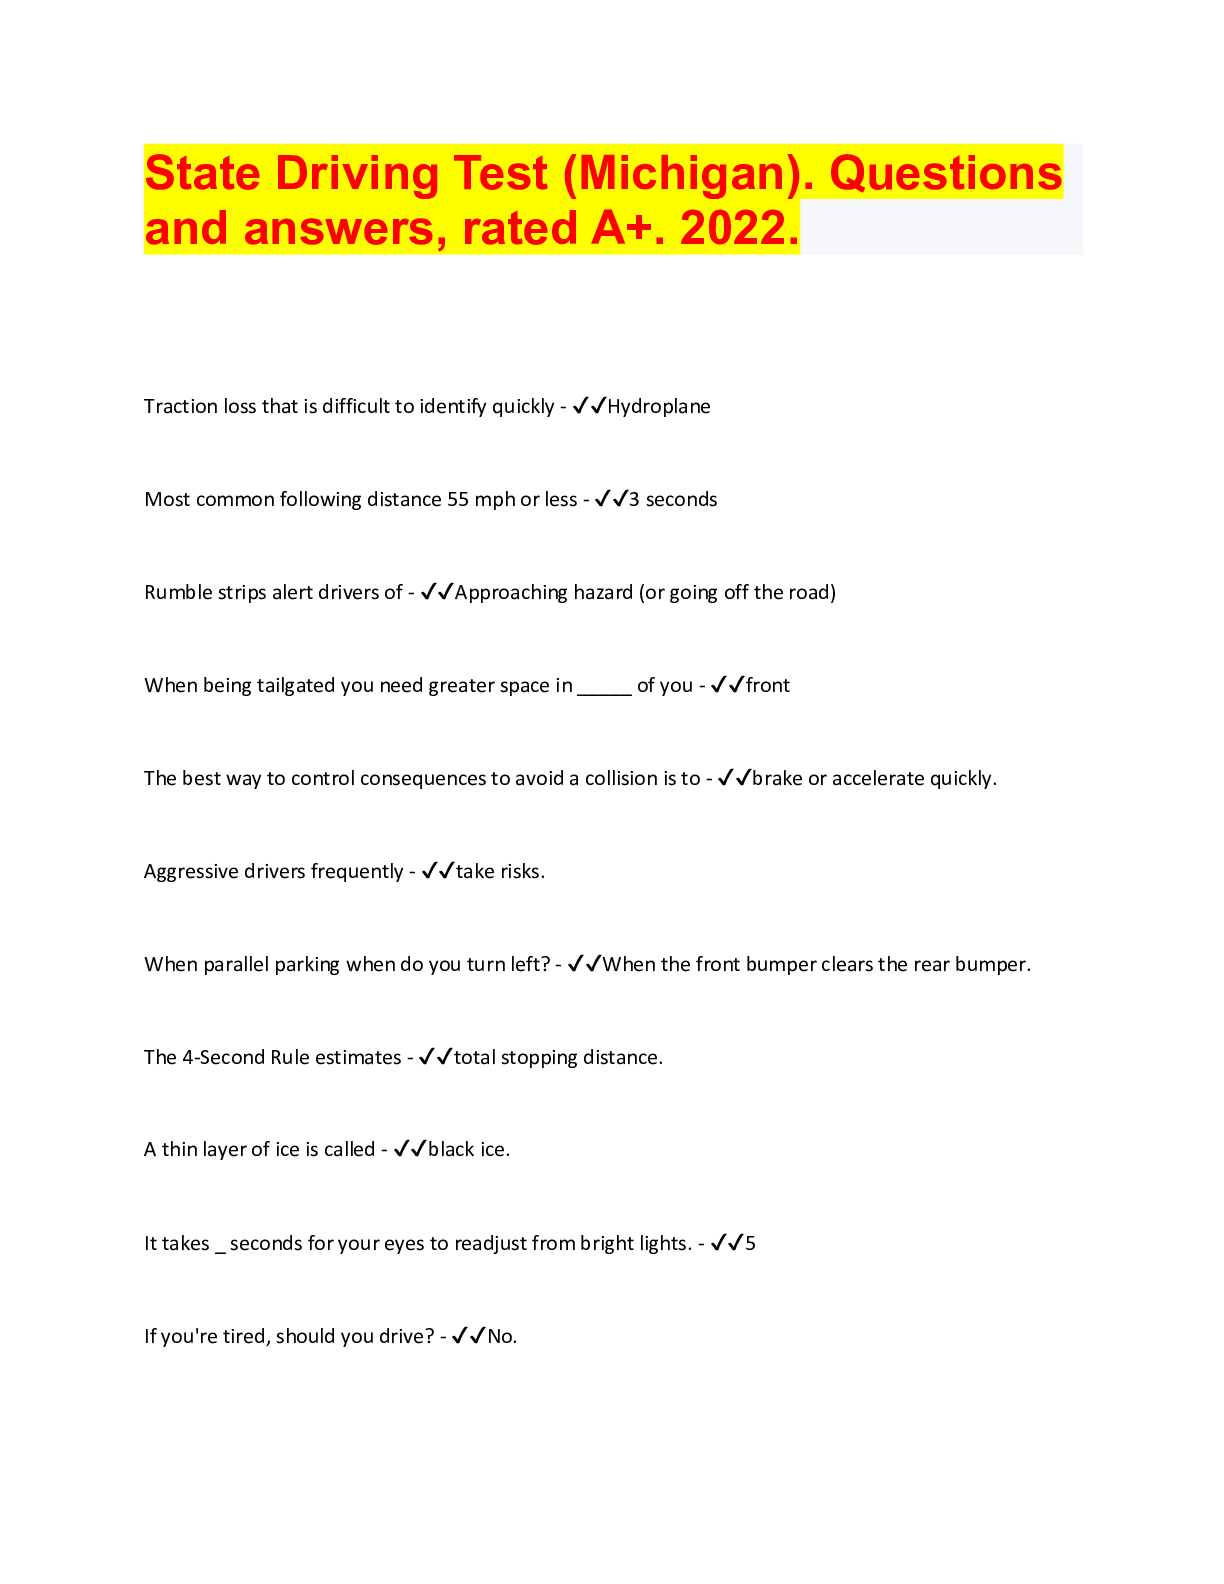 State Driving Test (Michigan). Questions and answers, rated A+. 2022